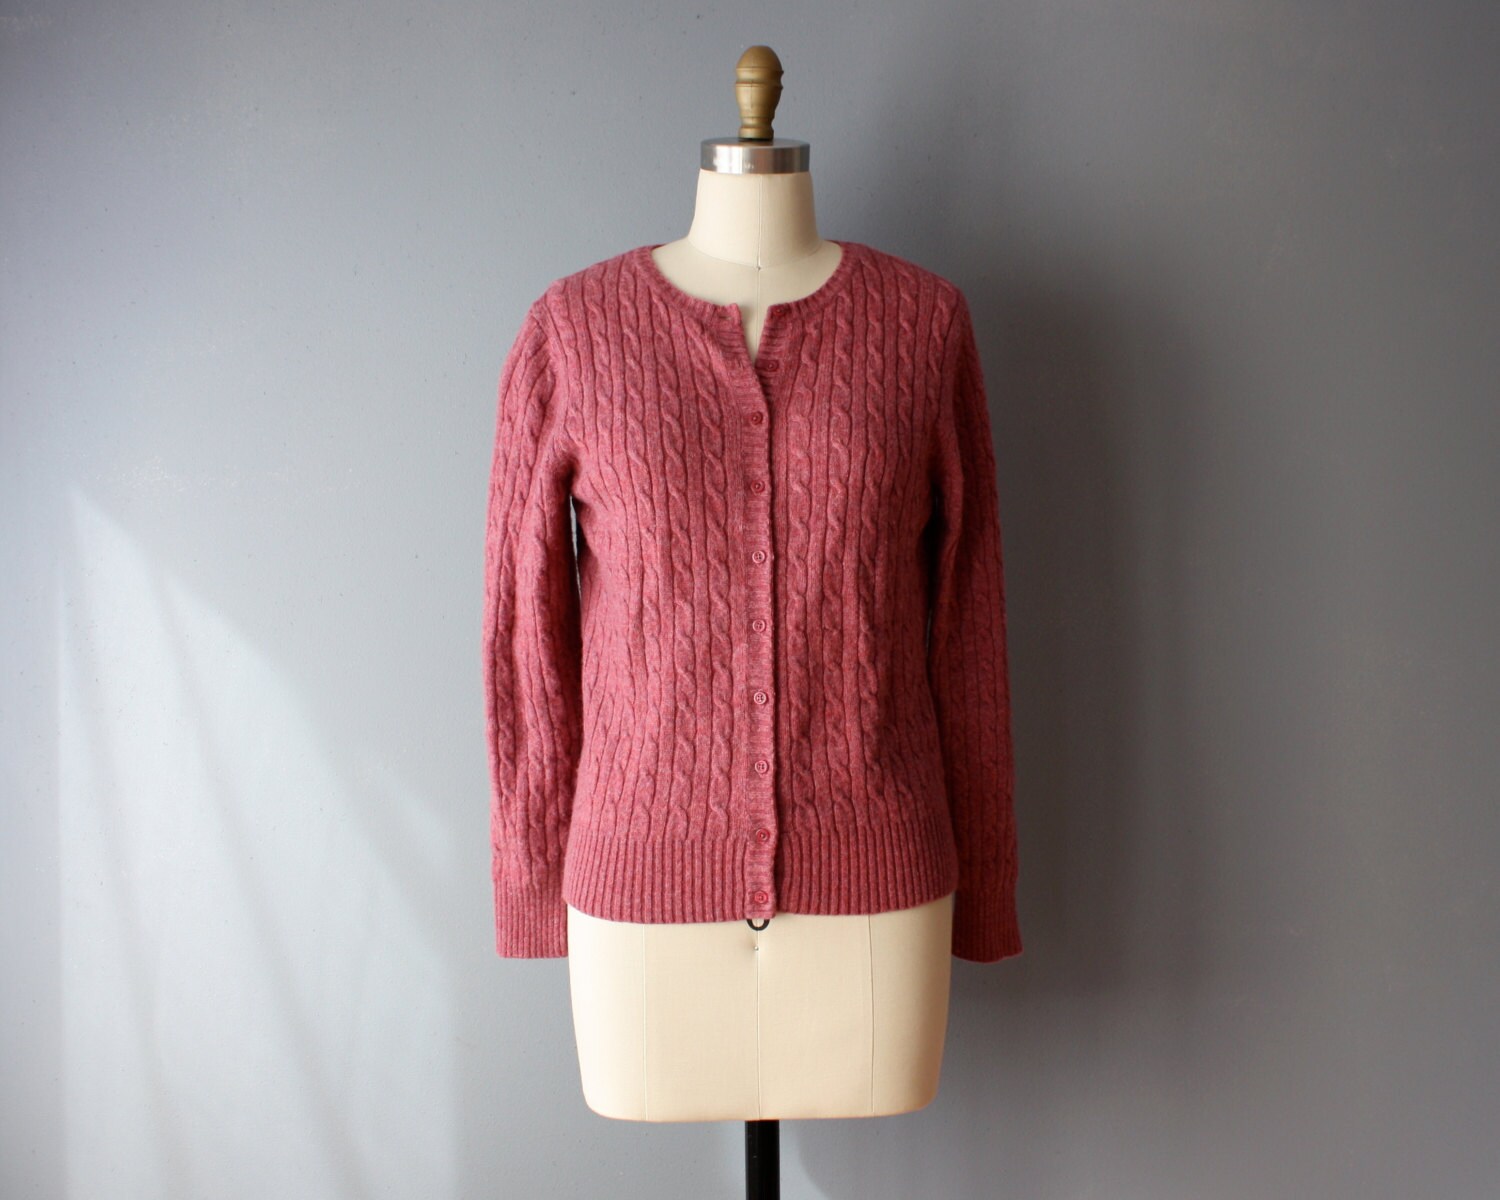 vintage 90s cardigan / dusty rose cable knit LL Bean sweater